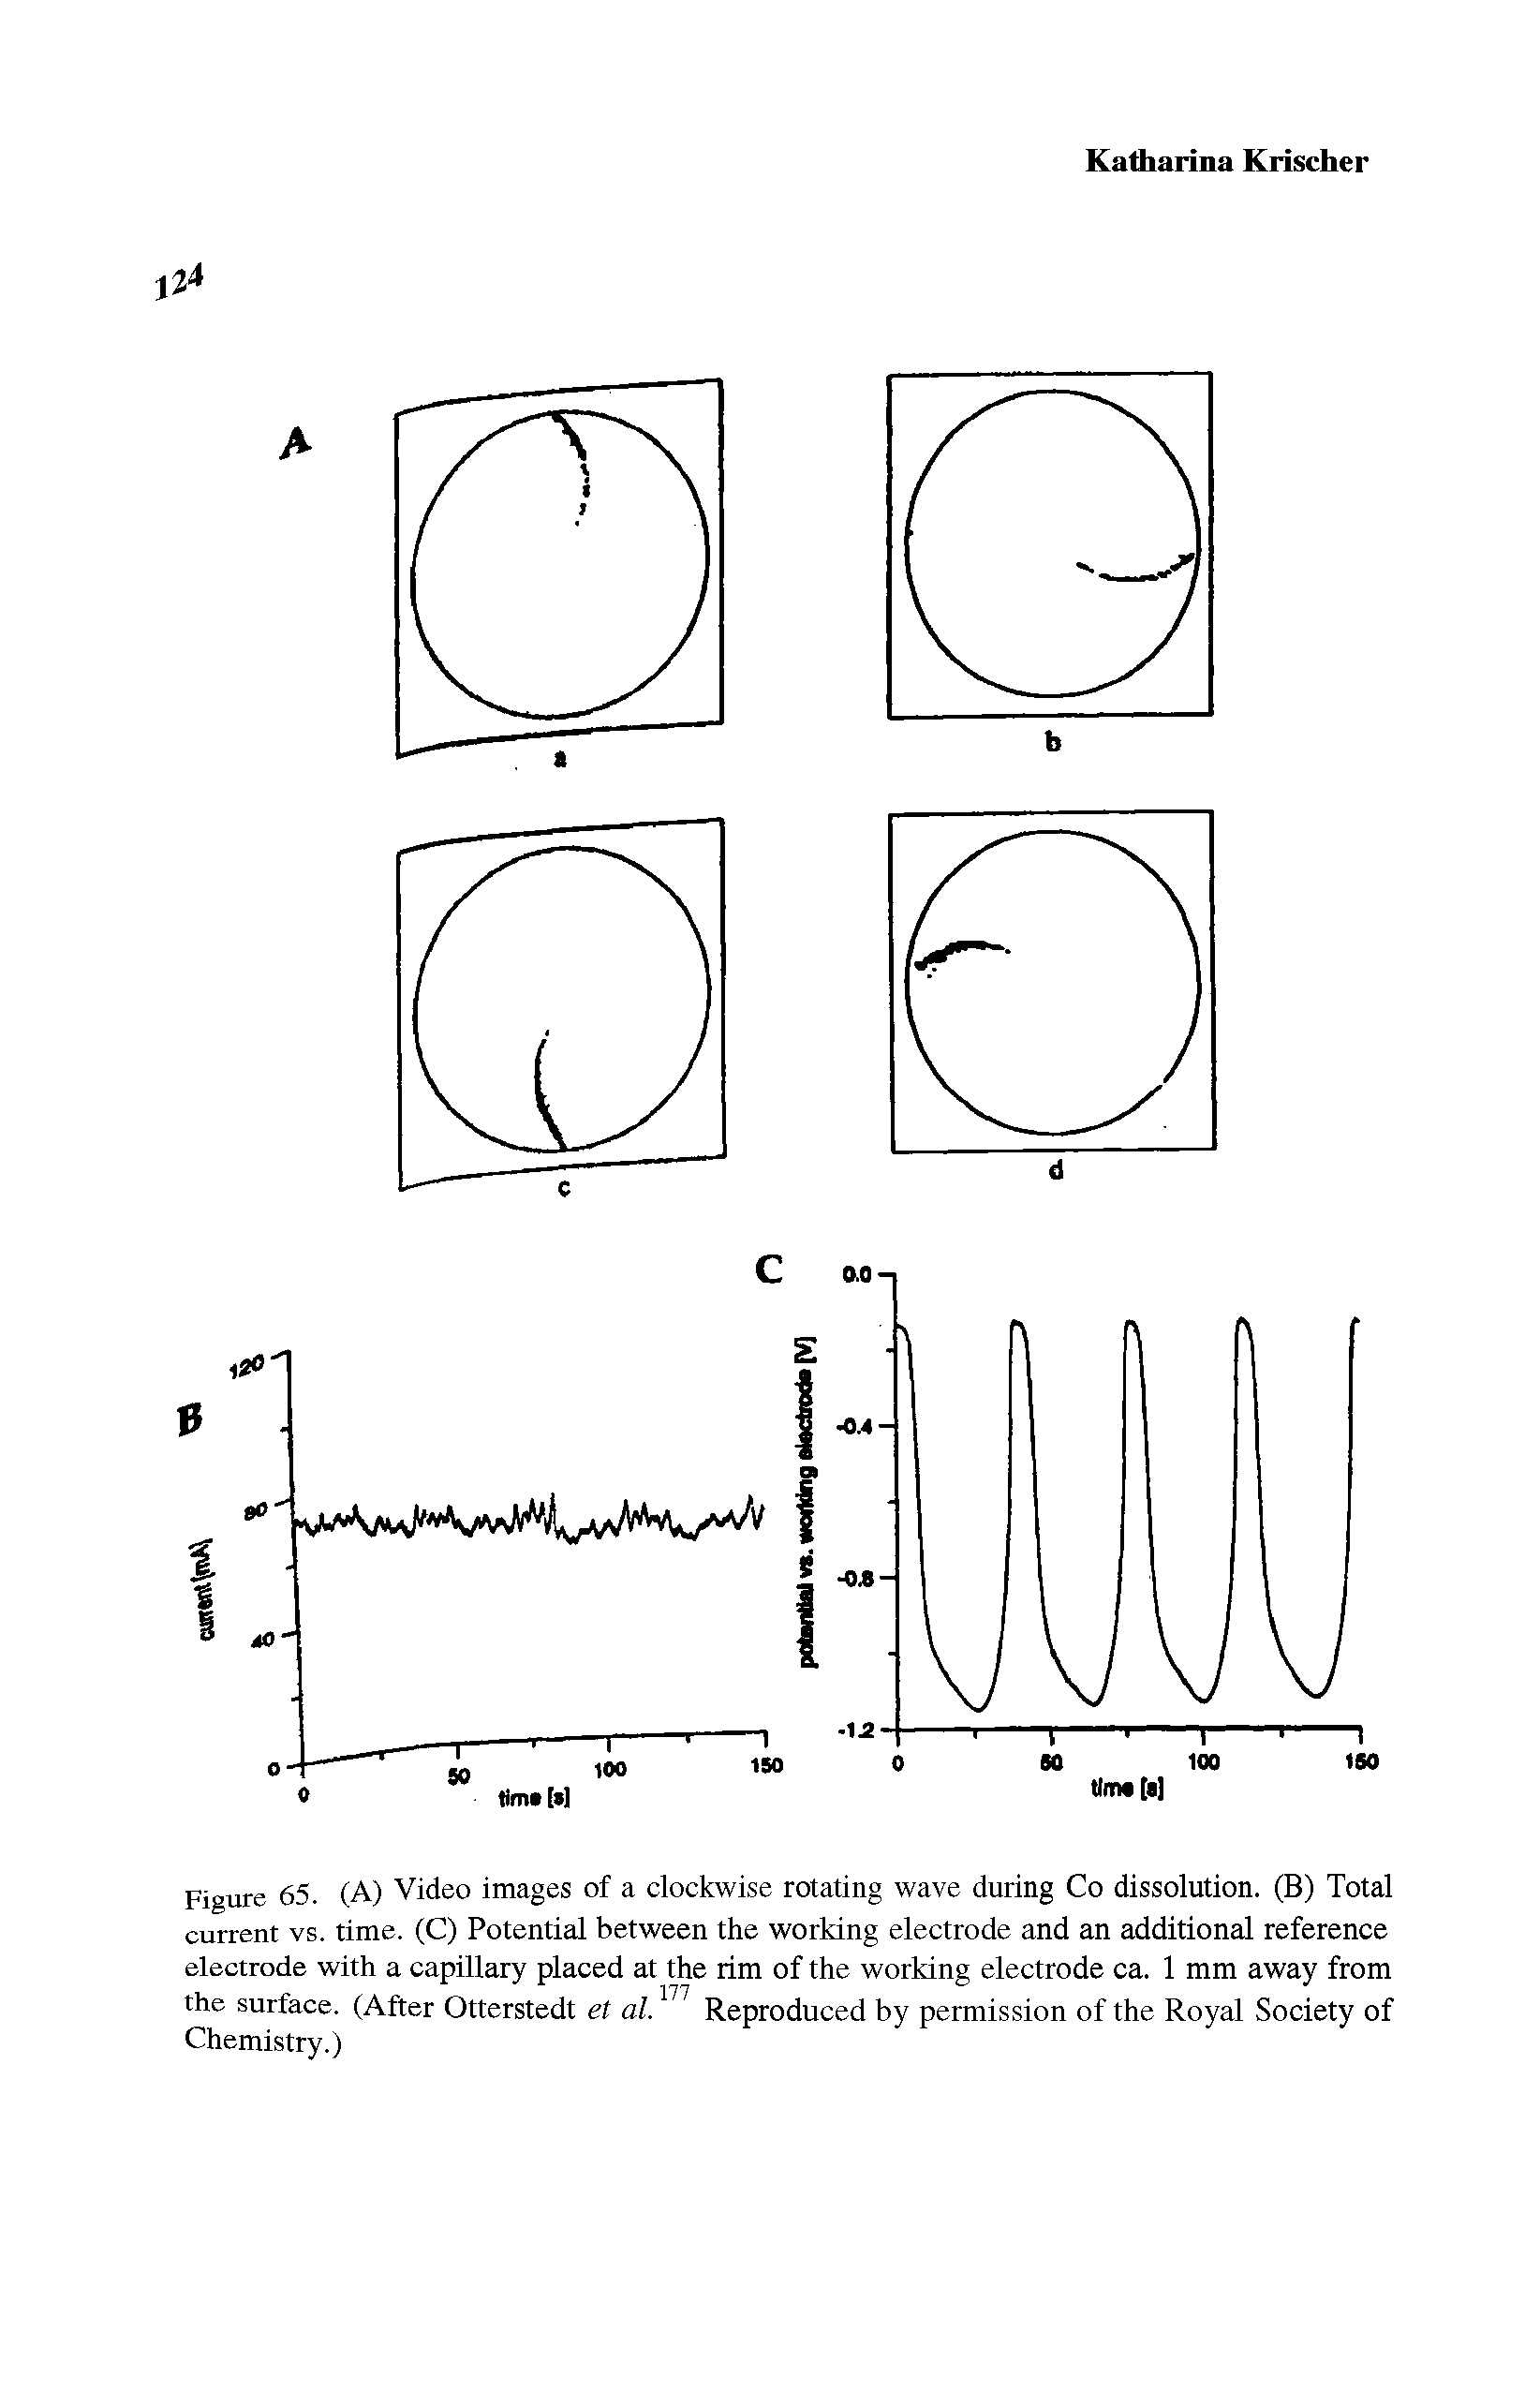 Figure 65. (A) Video images of a clockwise rotating wave during Co dissolution. (B) Total current vs. time. (C) Potential between the working electrode and an additional reference electrode with a capillary placed at the rim of the working electrode ca. 1 mm away from the surface. (After Otterstedt et al. Reproduced by permission of the Royal Society of Chemistry.)...